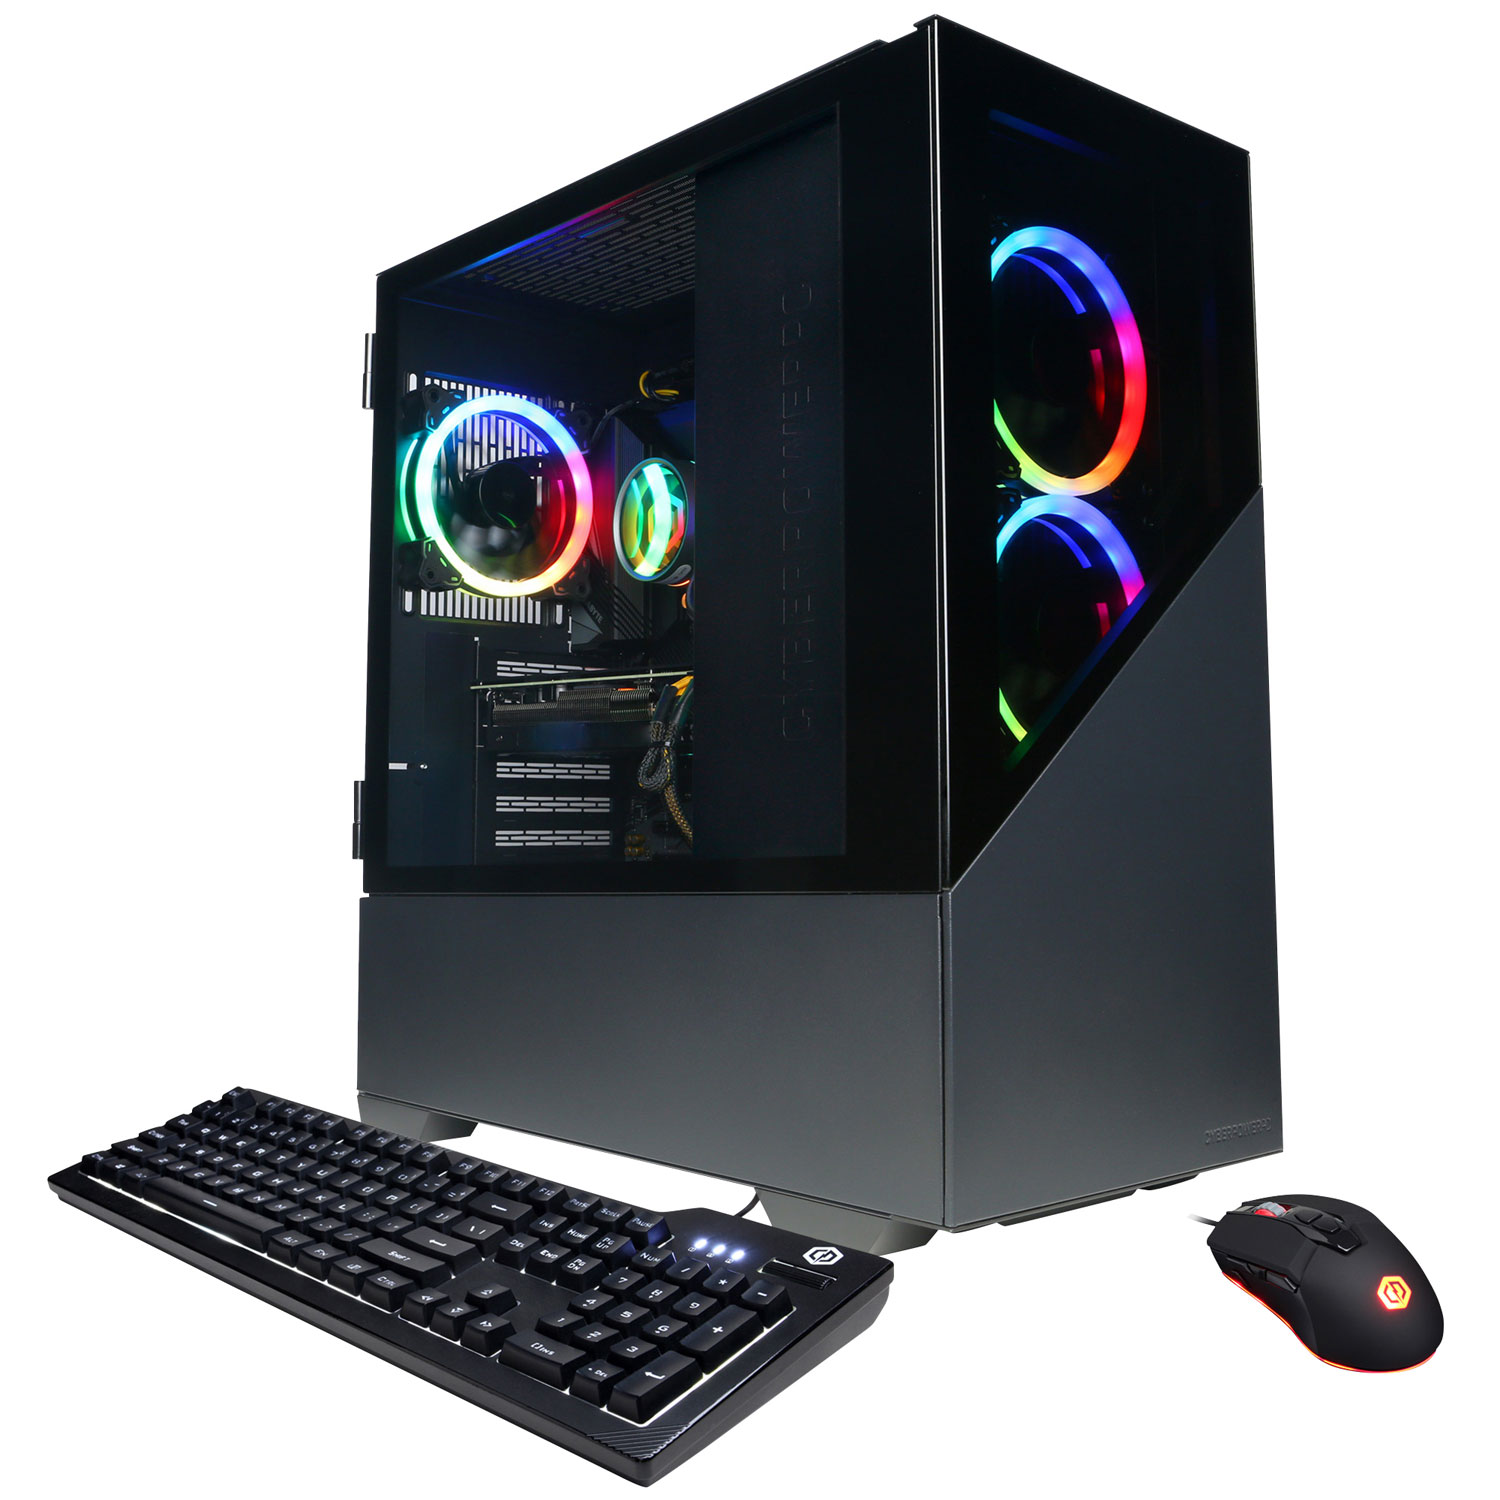 CyberPowerPC Gamer Supreme Gaming PC (Intel Core i7-12700KF/1TB SSD/16GB RAM/RTX 3070) - Eng - Only at Best Buy